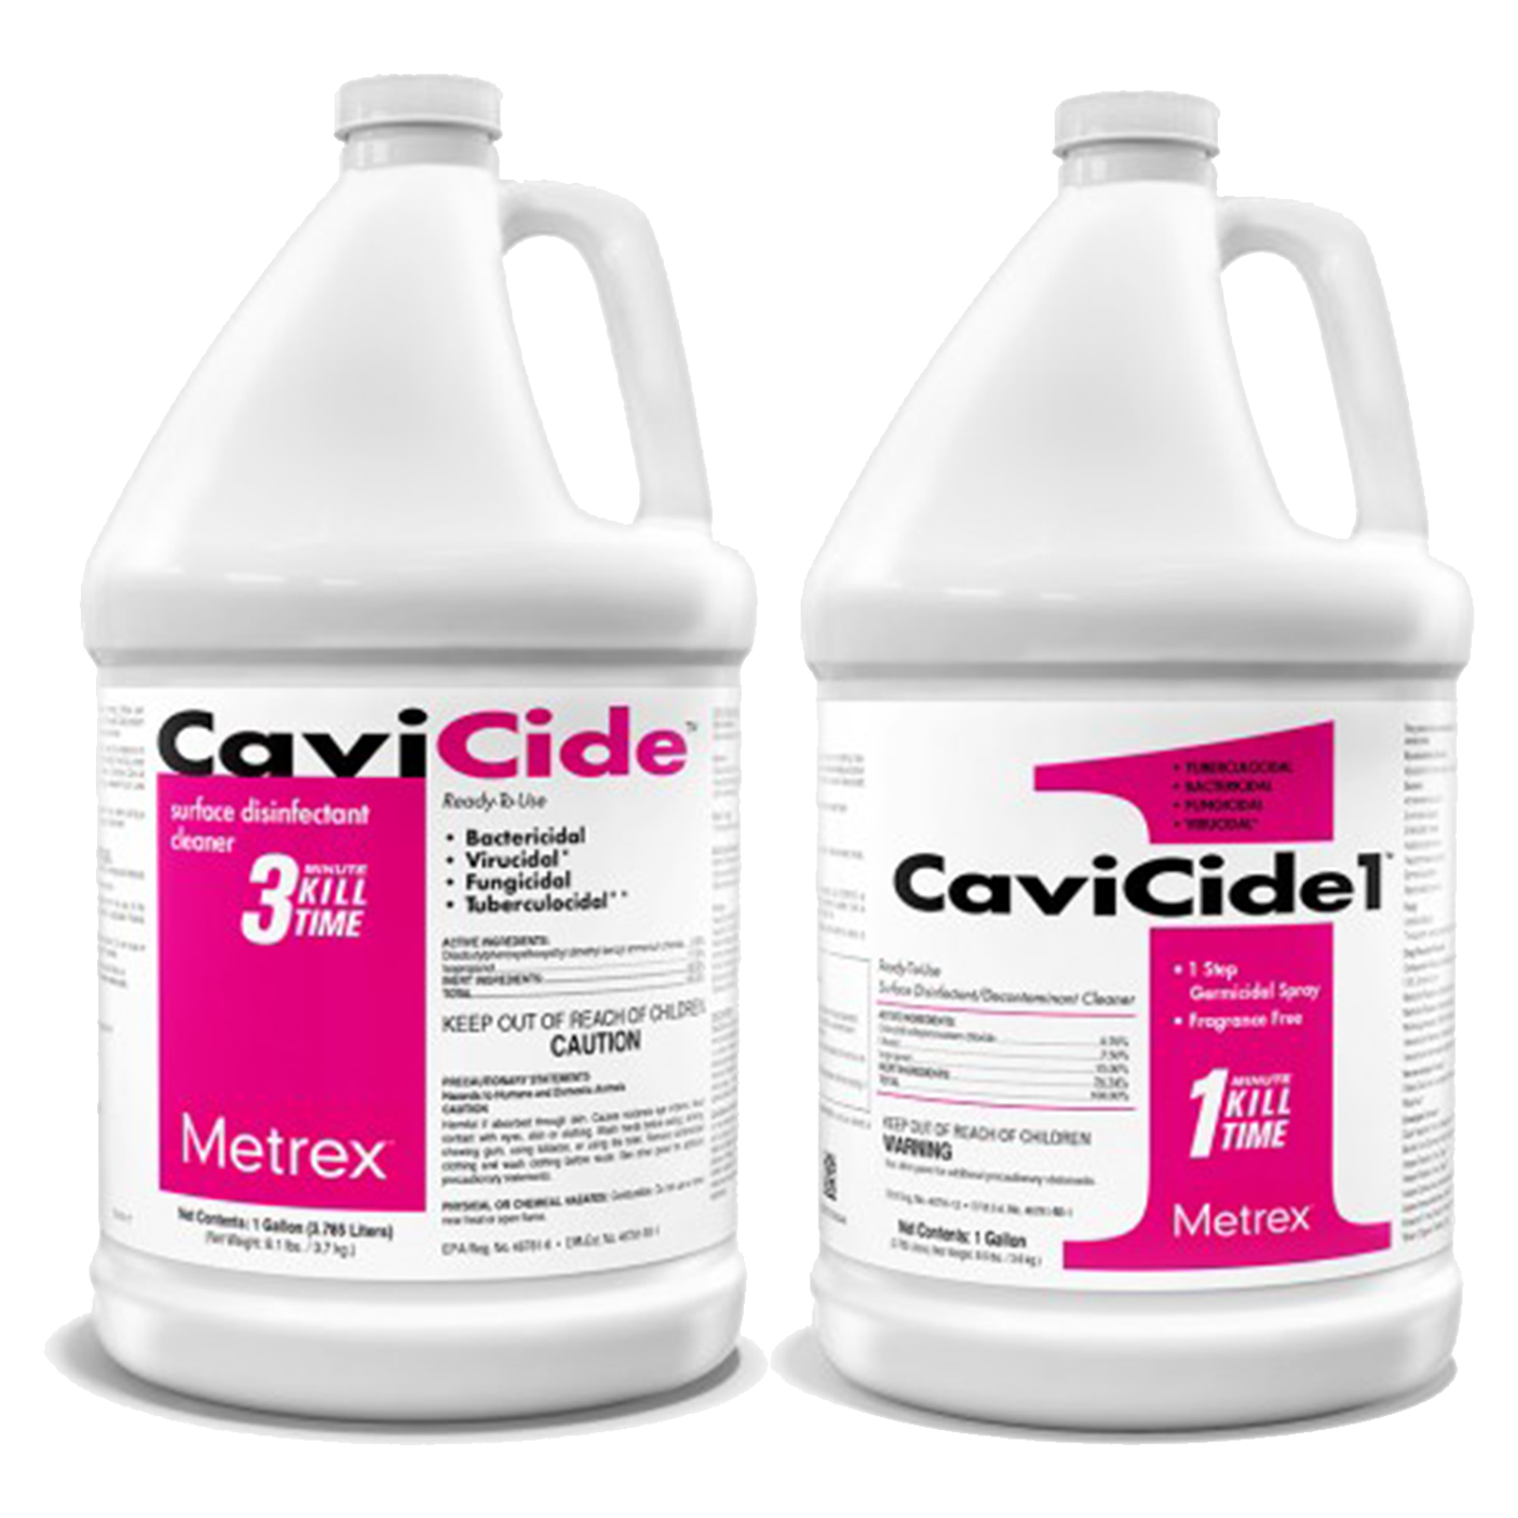 Cavicide Surface Disinfectants